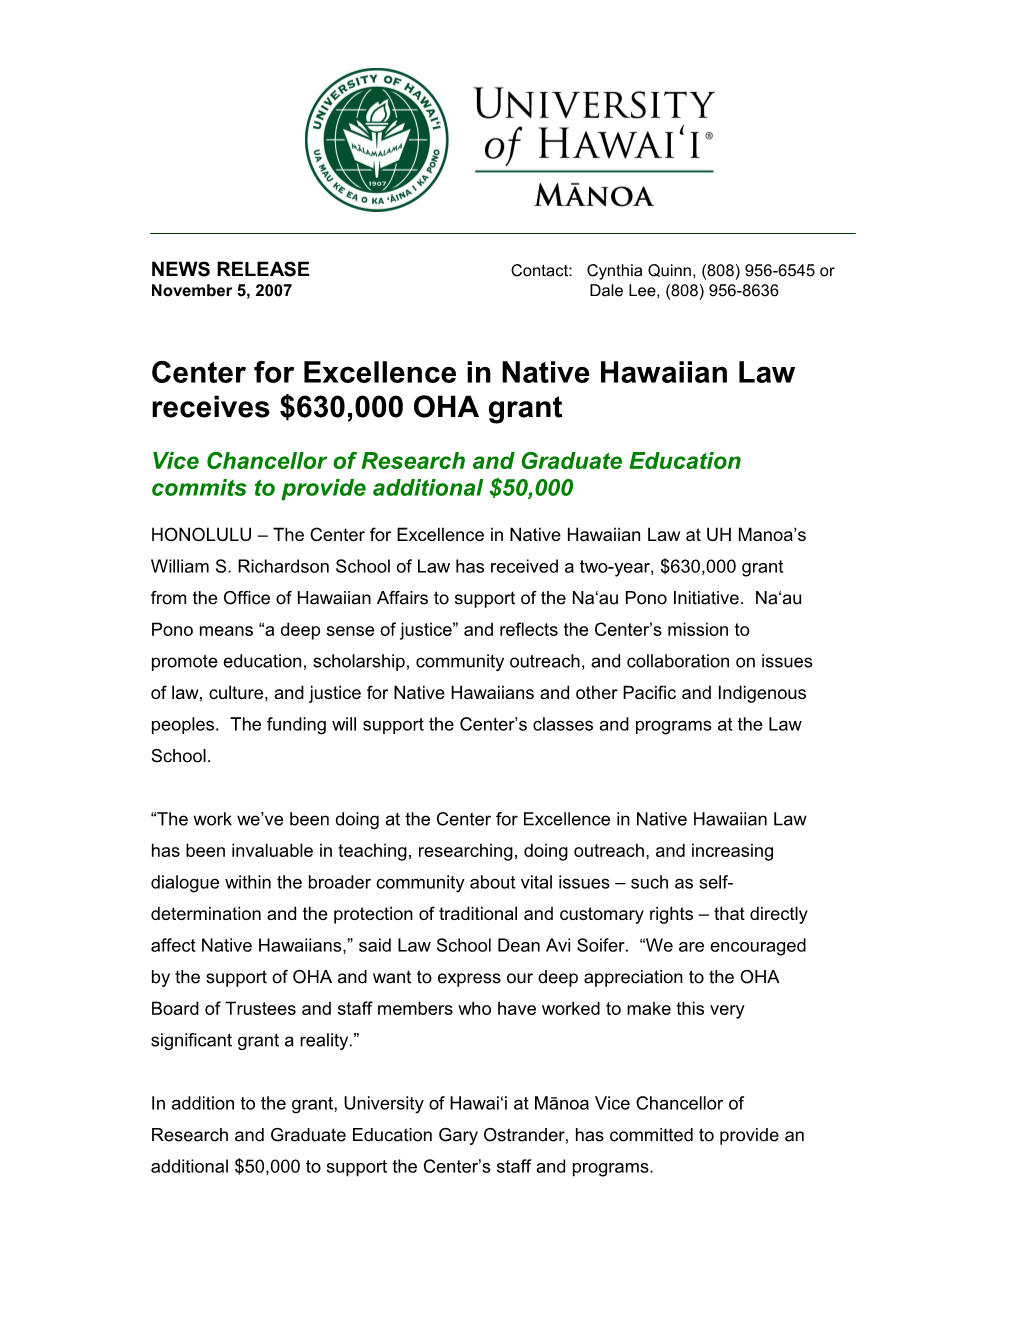 Center for Excellence in Native Hawaiian Law Receives $630,000 OHA Grant